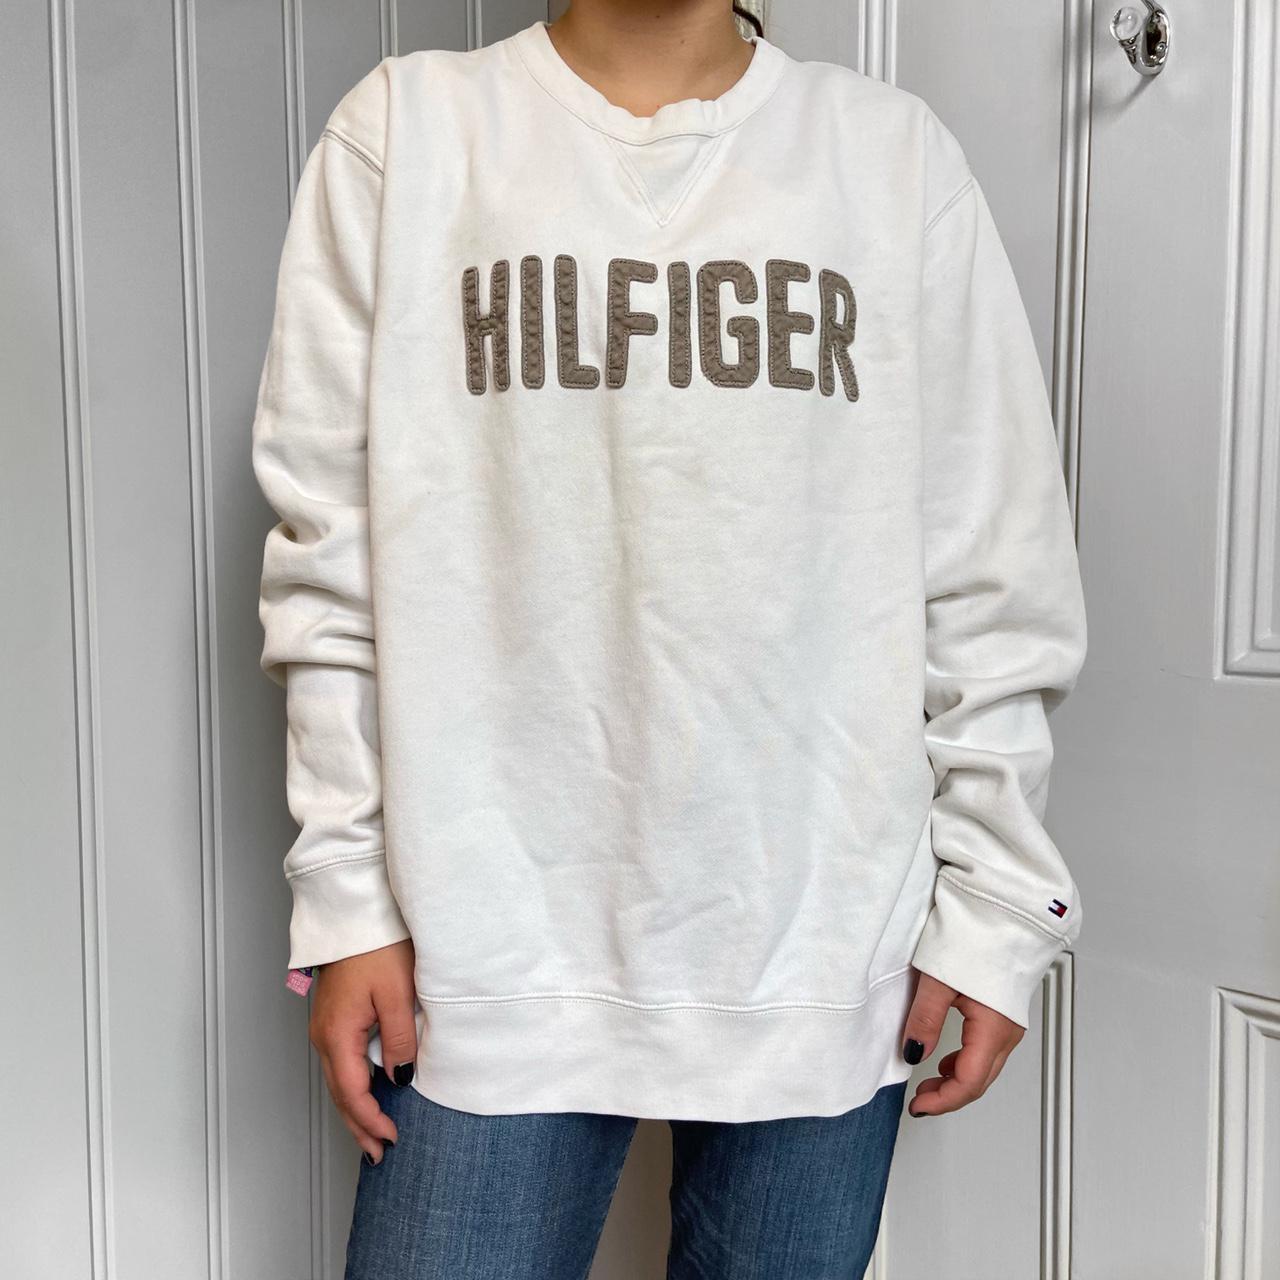 Tommy Hilfiger Women's White and Grey